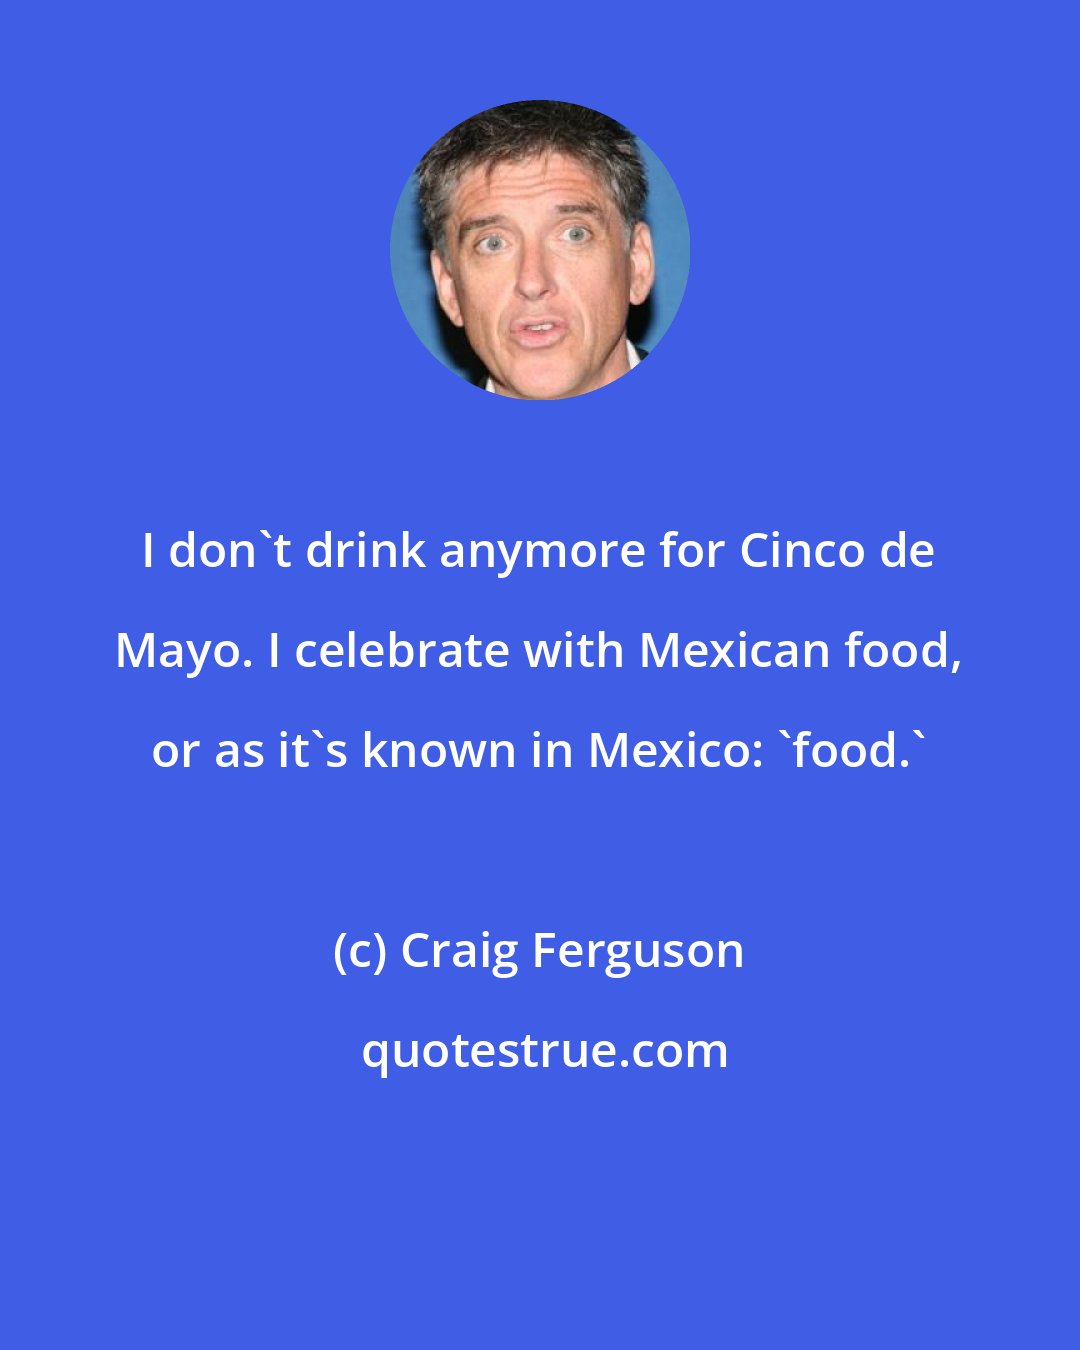 Craig Ferguson: I don't drink anymore for Cinco de Mayo. I celebrate with Mexican food, or as it's known in Mexico: 'food.'